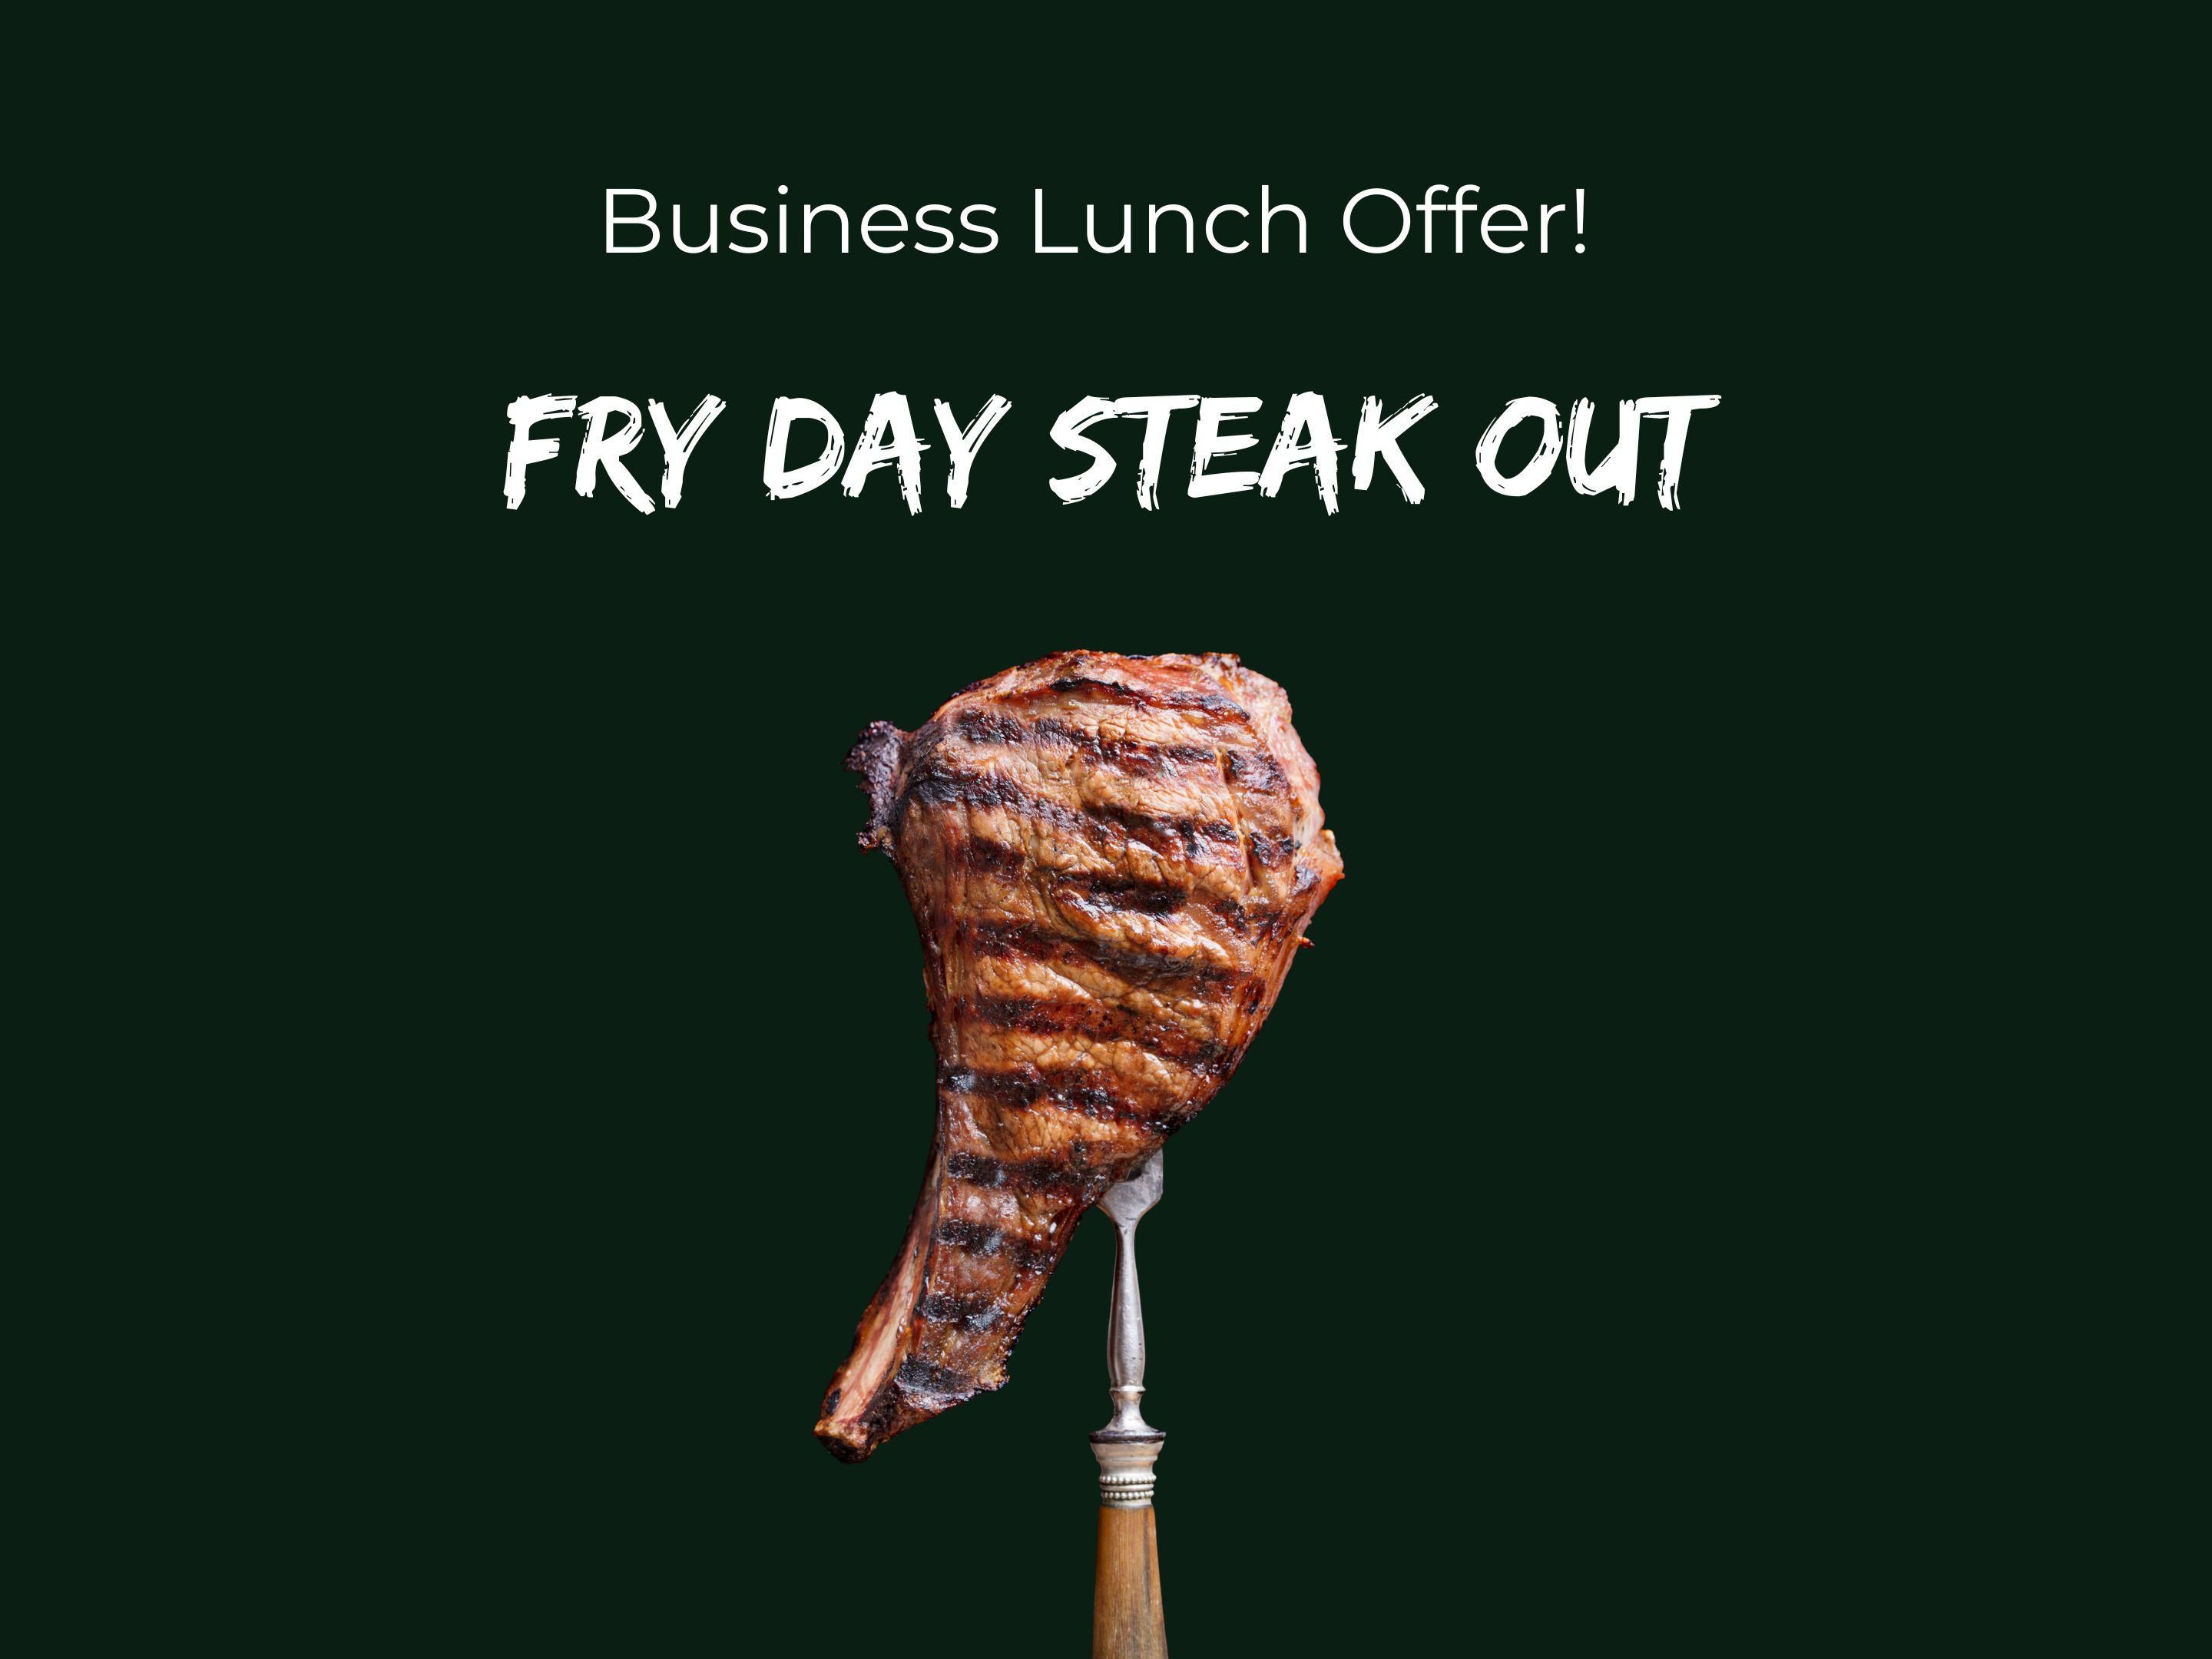 Hey, let's talk about this over lunch!
New business lunch offer in your friendly neighborhood restaurant!